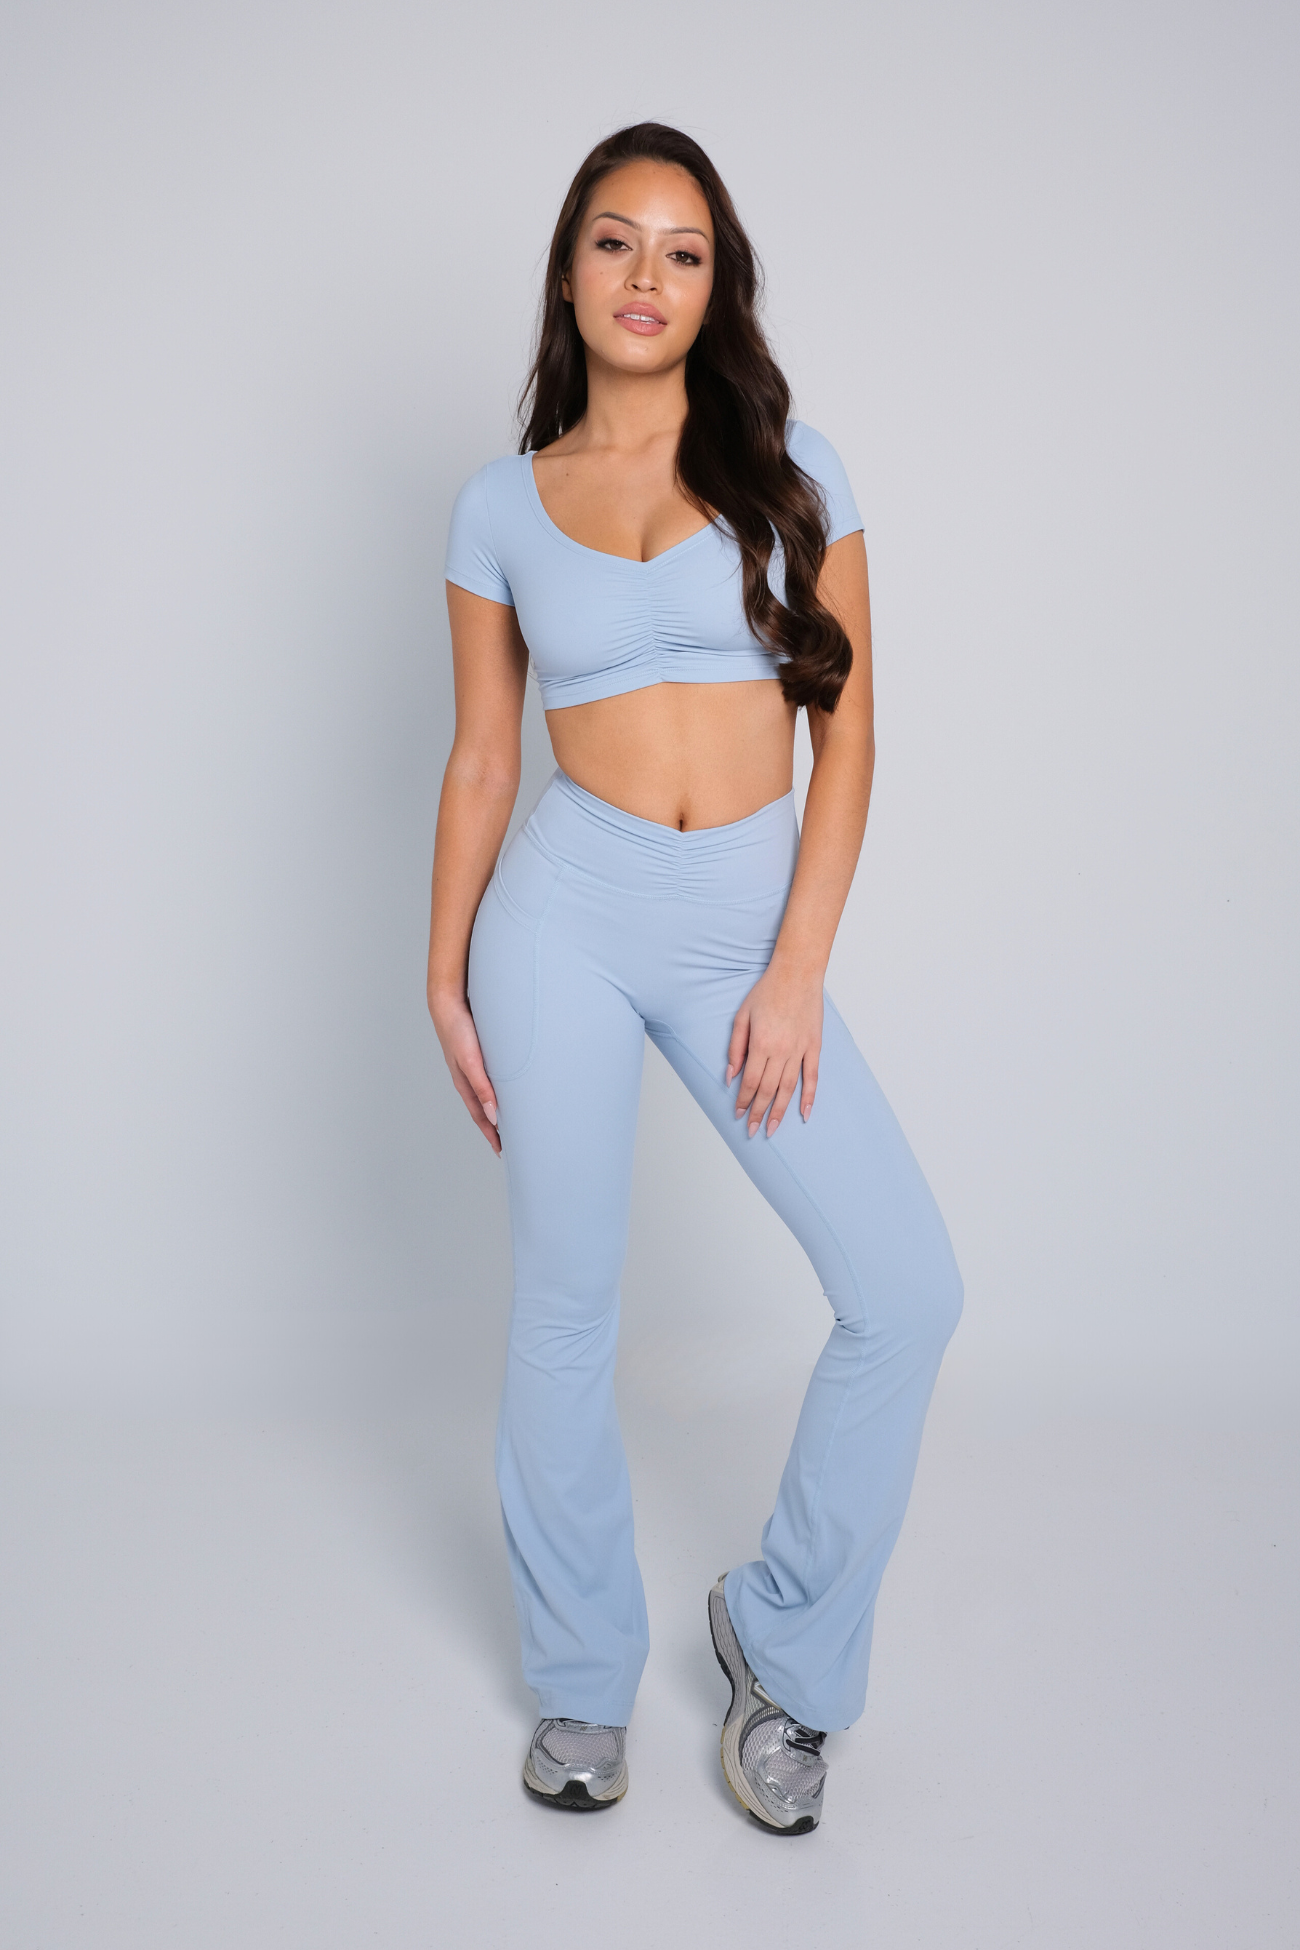 Ruched Flare Pocket (Tall) Leggings - Baby Blue